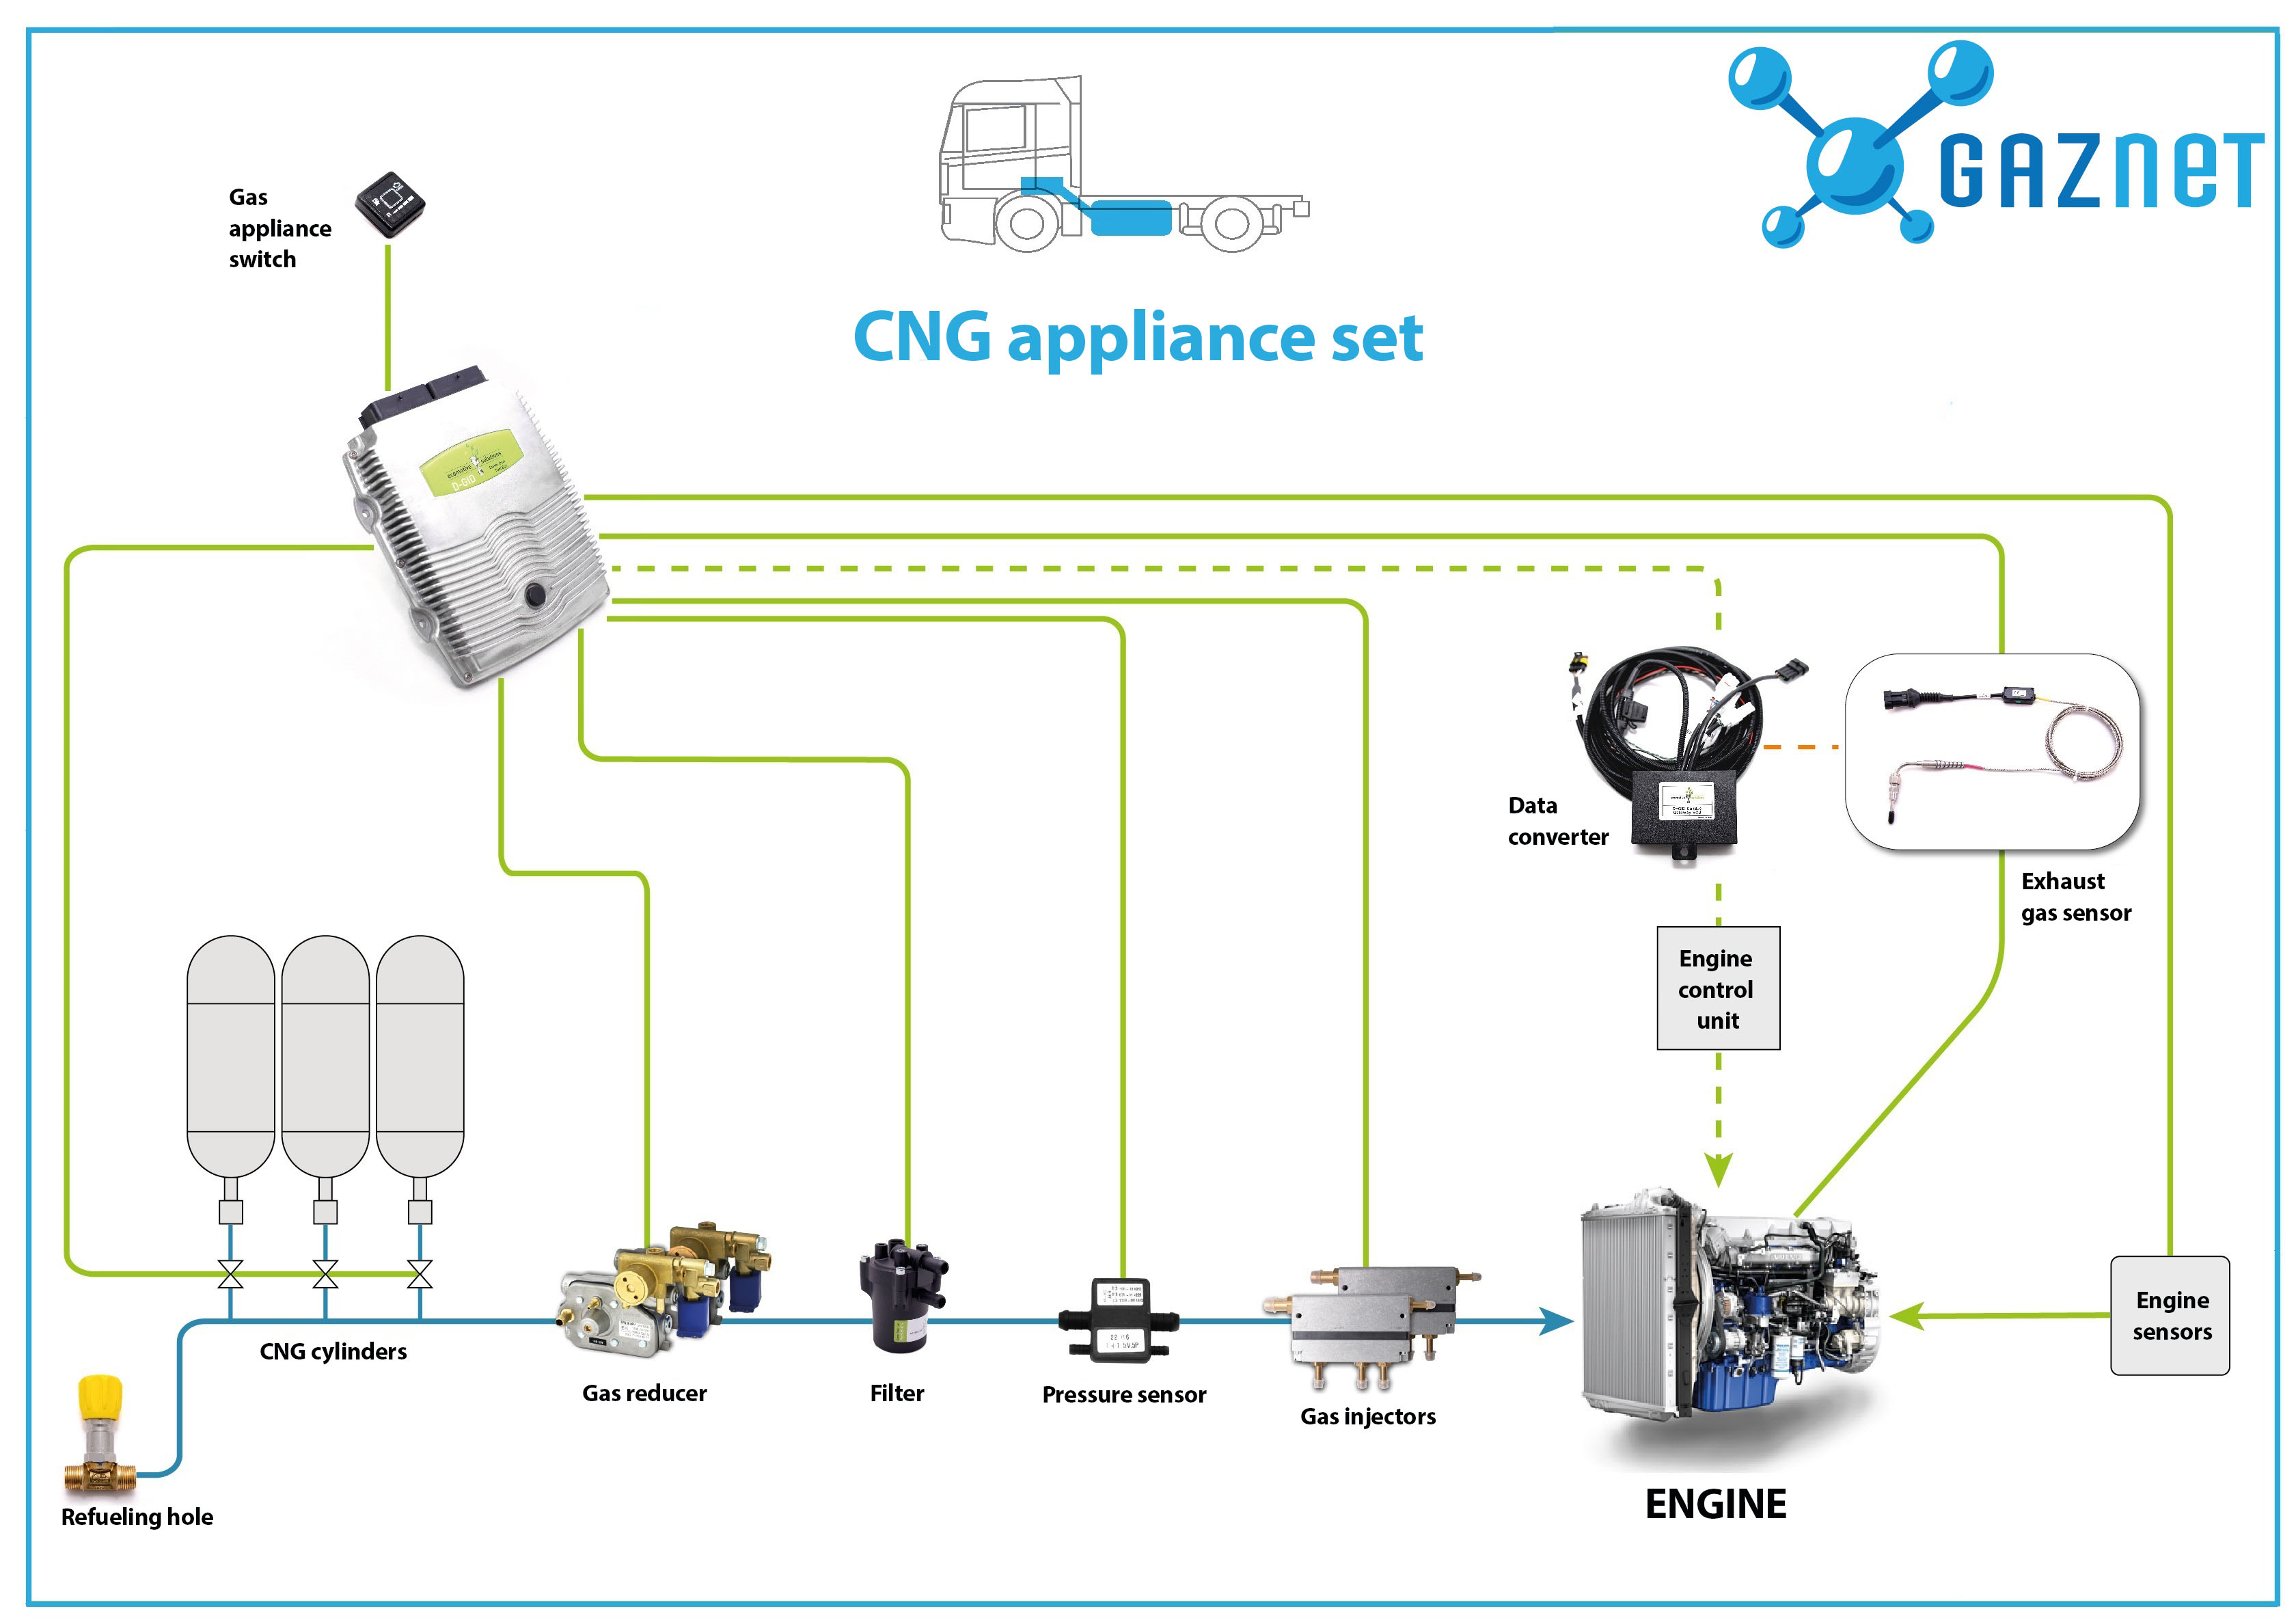 Installing Methane Gas Cng Equipment On A Diesel Engine Saves Up To 15 000 Euros Annually In Estonia Latvia And Lithuania Gaznet